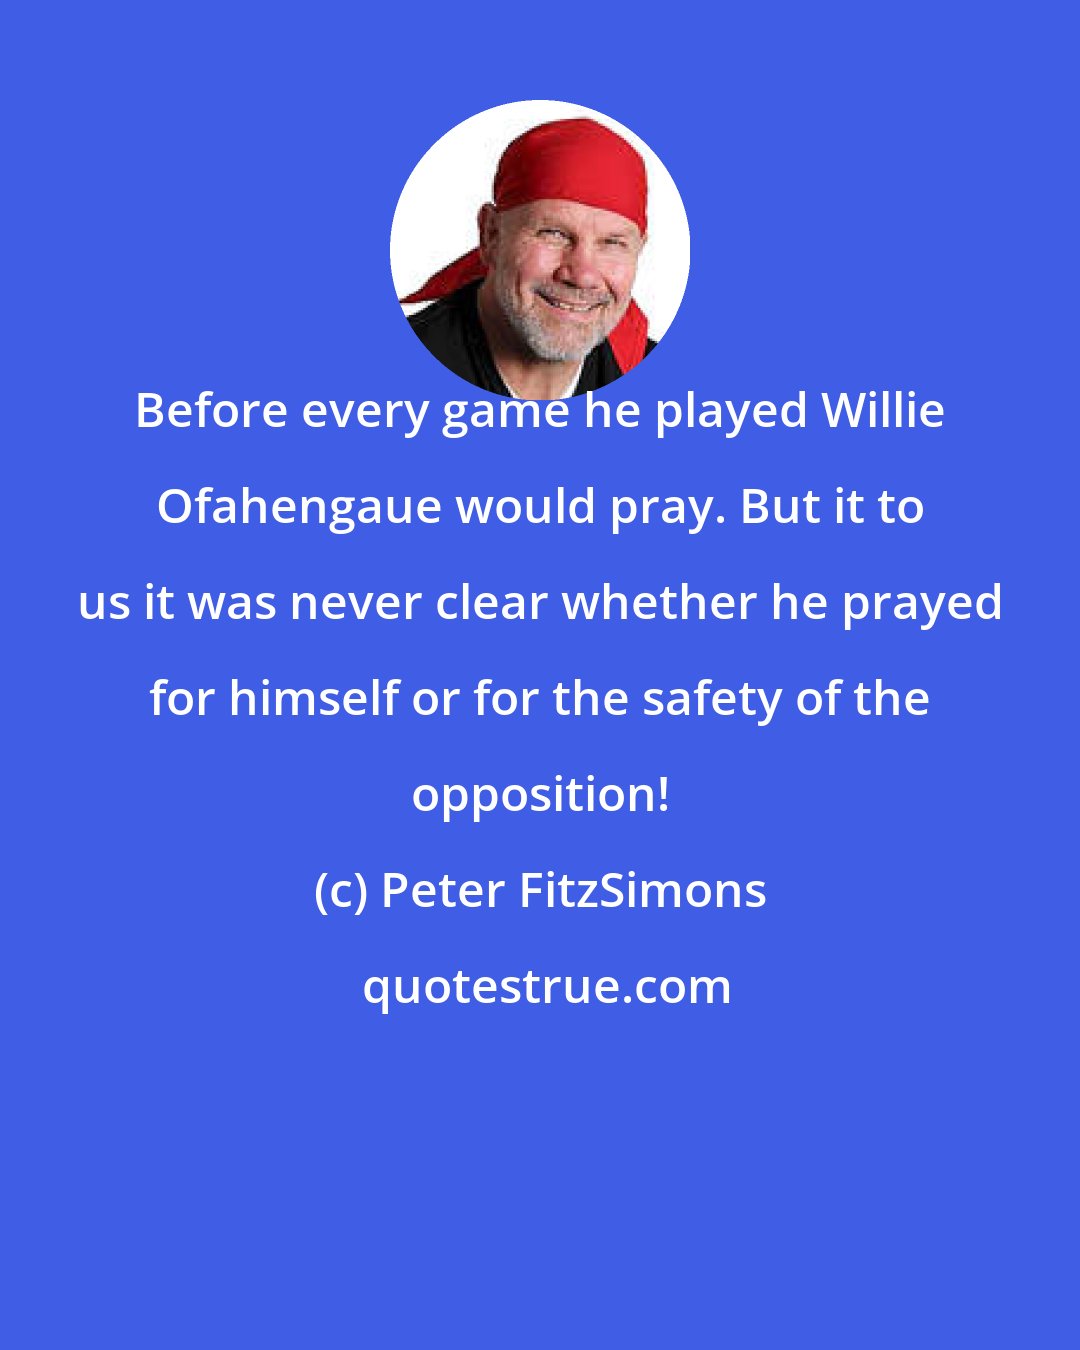 Peter FitzSimons: Before every game he played Willie Ofahengaue would pray. But it to us it was never clear whether he prayed for himself or for the safety of the opposition!